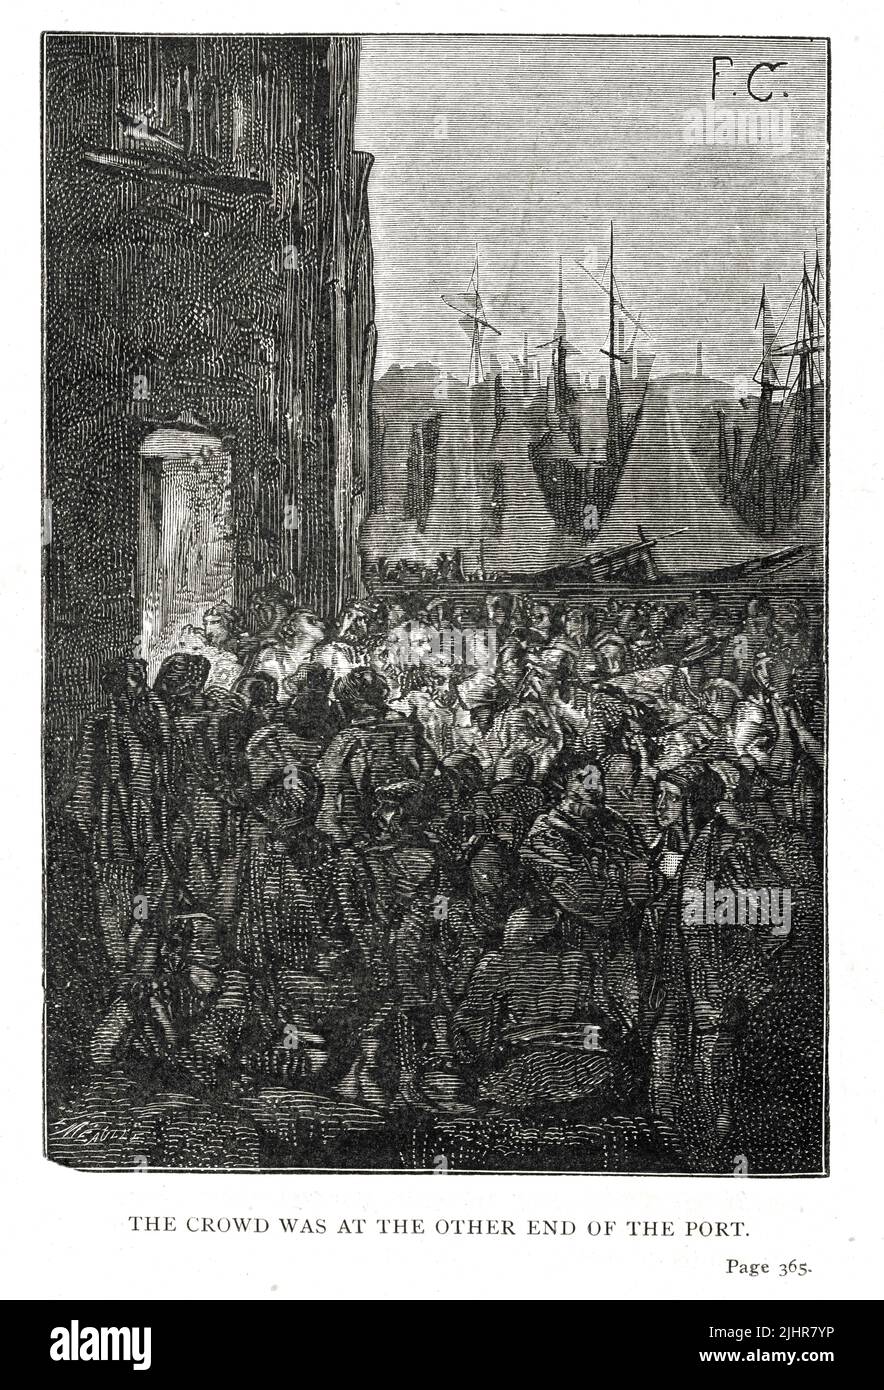 Gilliatt's arrival in St. Sampson: 'He was not observed. The crowd was at the other end of the port, near the narrow entrance, by the Bravées.' Third part, Book III, chapter V.  Illustration from a set of 56 engravings published in the English edition of 'Les Travailleurs de la Mer' ('Toilers of the Sea'), by Victor Hugo, published in 1869 by Sampson Low, Son and Marston.  Illustrator: François-Nicolas Chifflart. Engraver: Fortuné Méaulle. Stock Photo